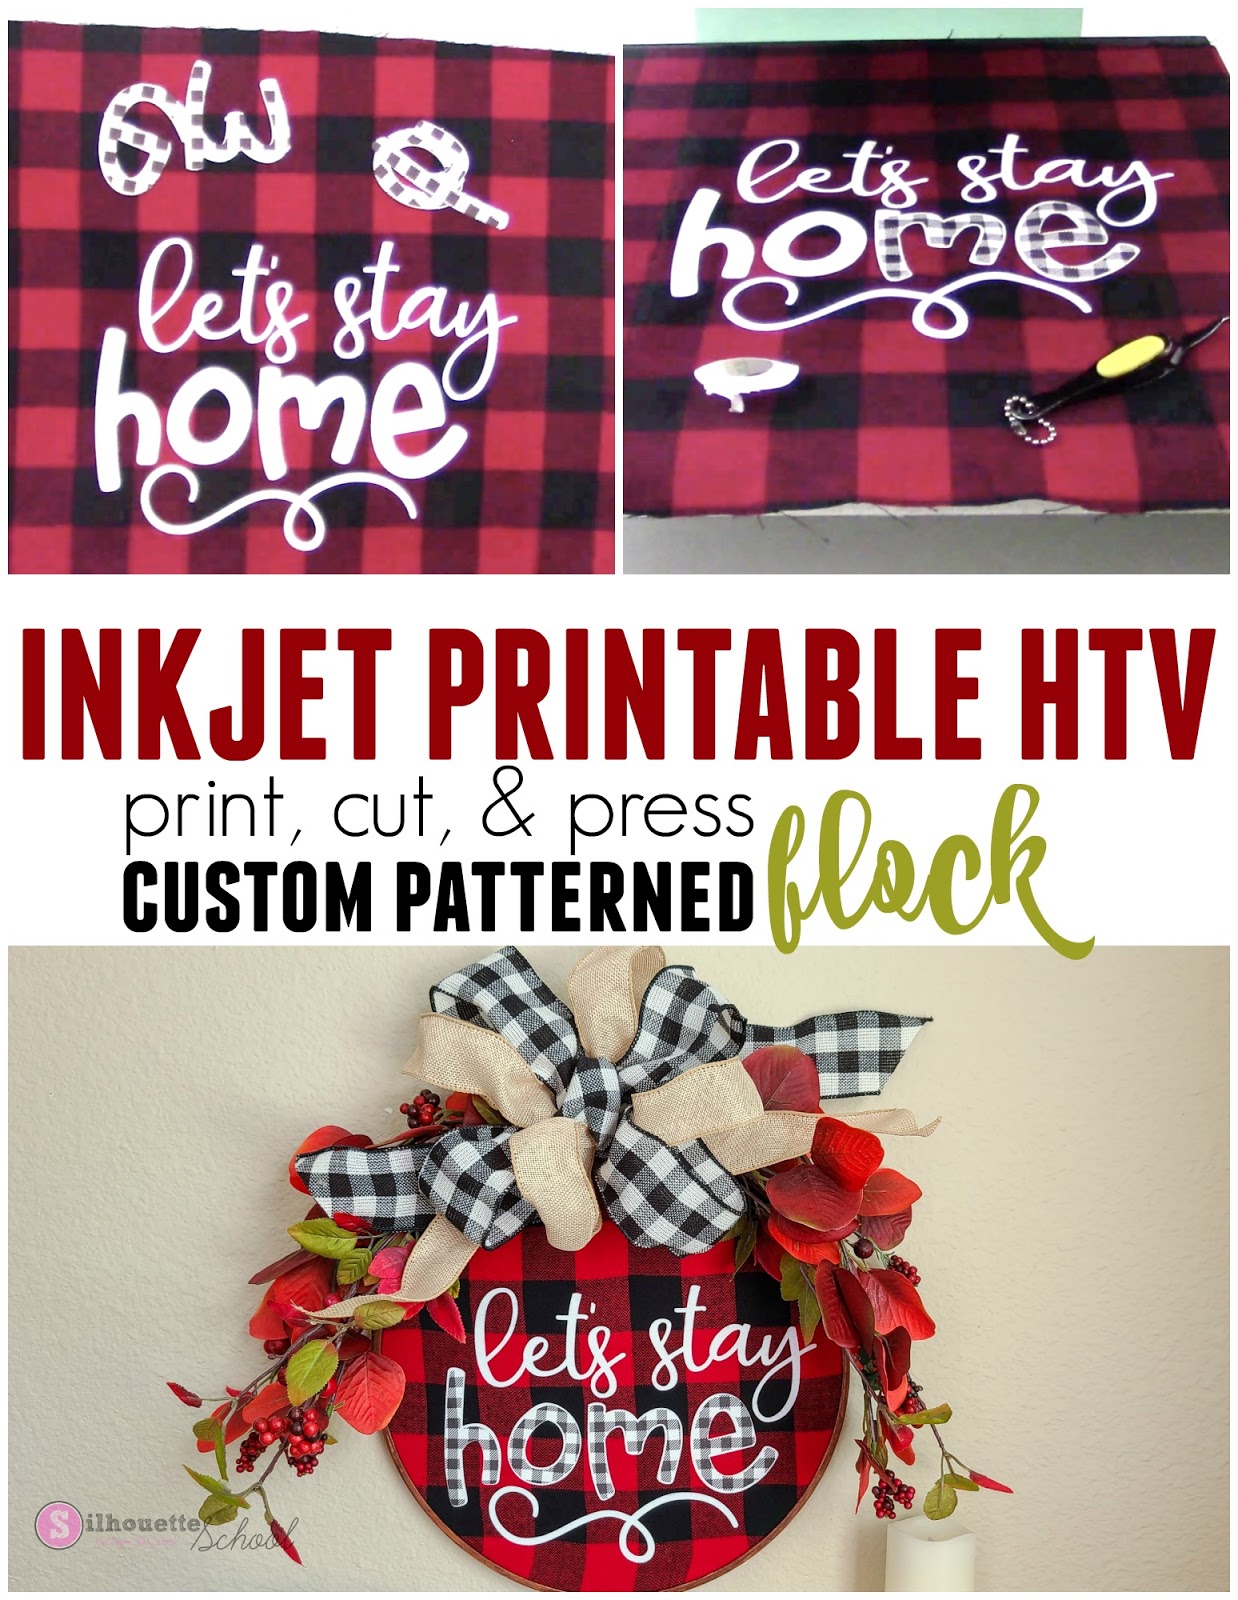 Printable Heat Transfer Vinyl 101: Learn About All The Basics!